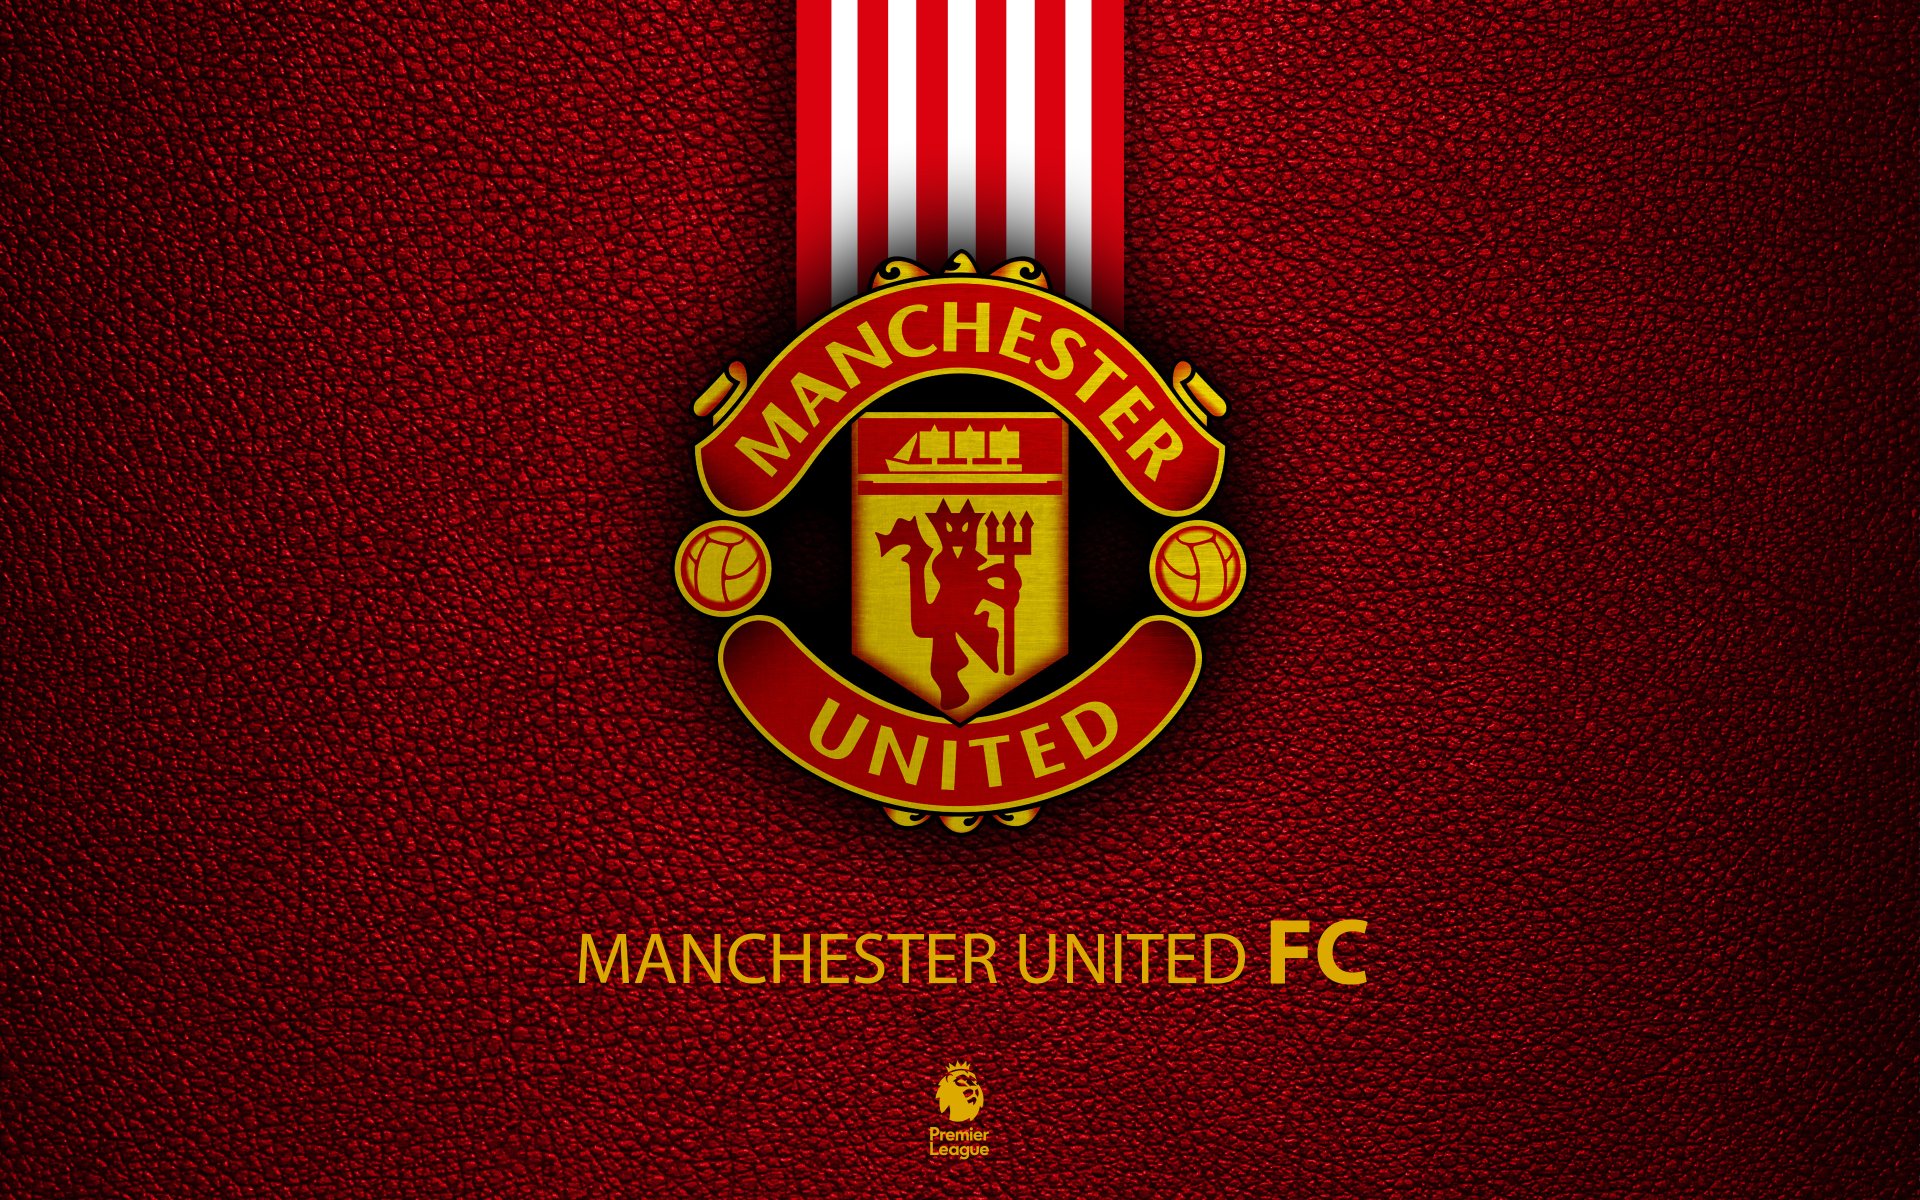 CLB Manchester United